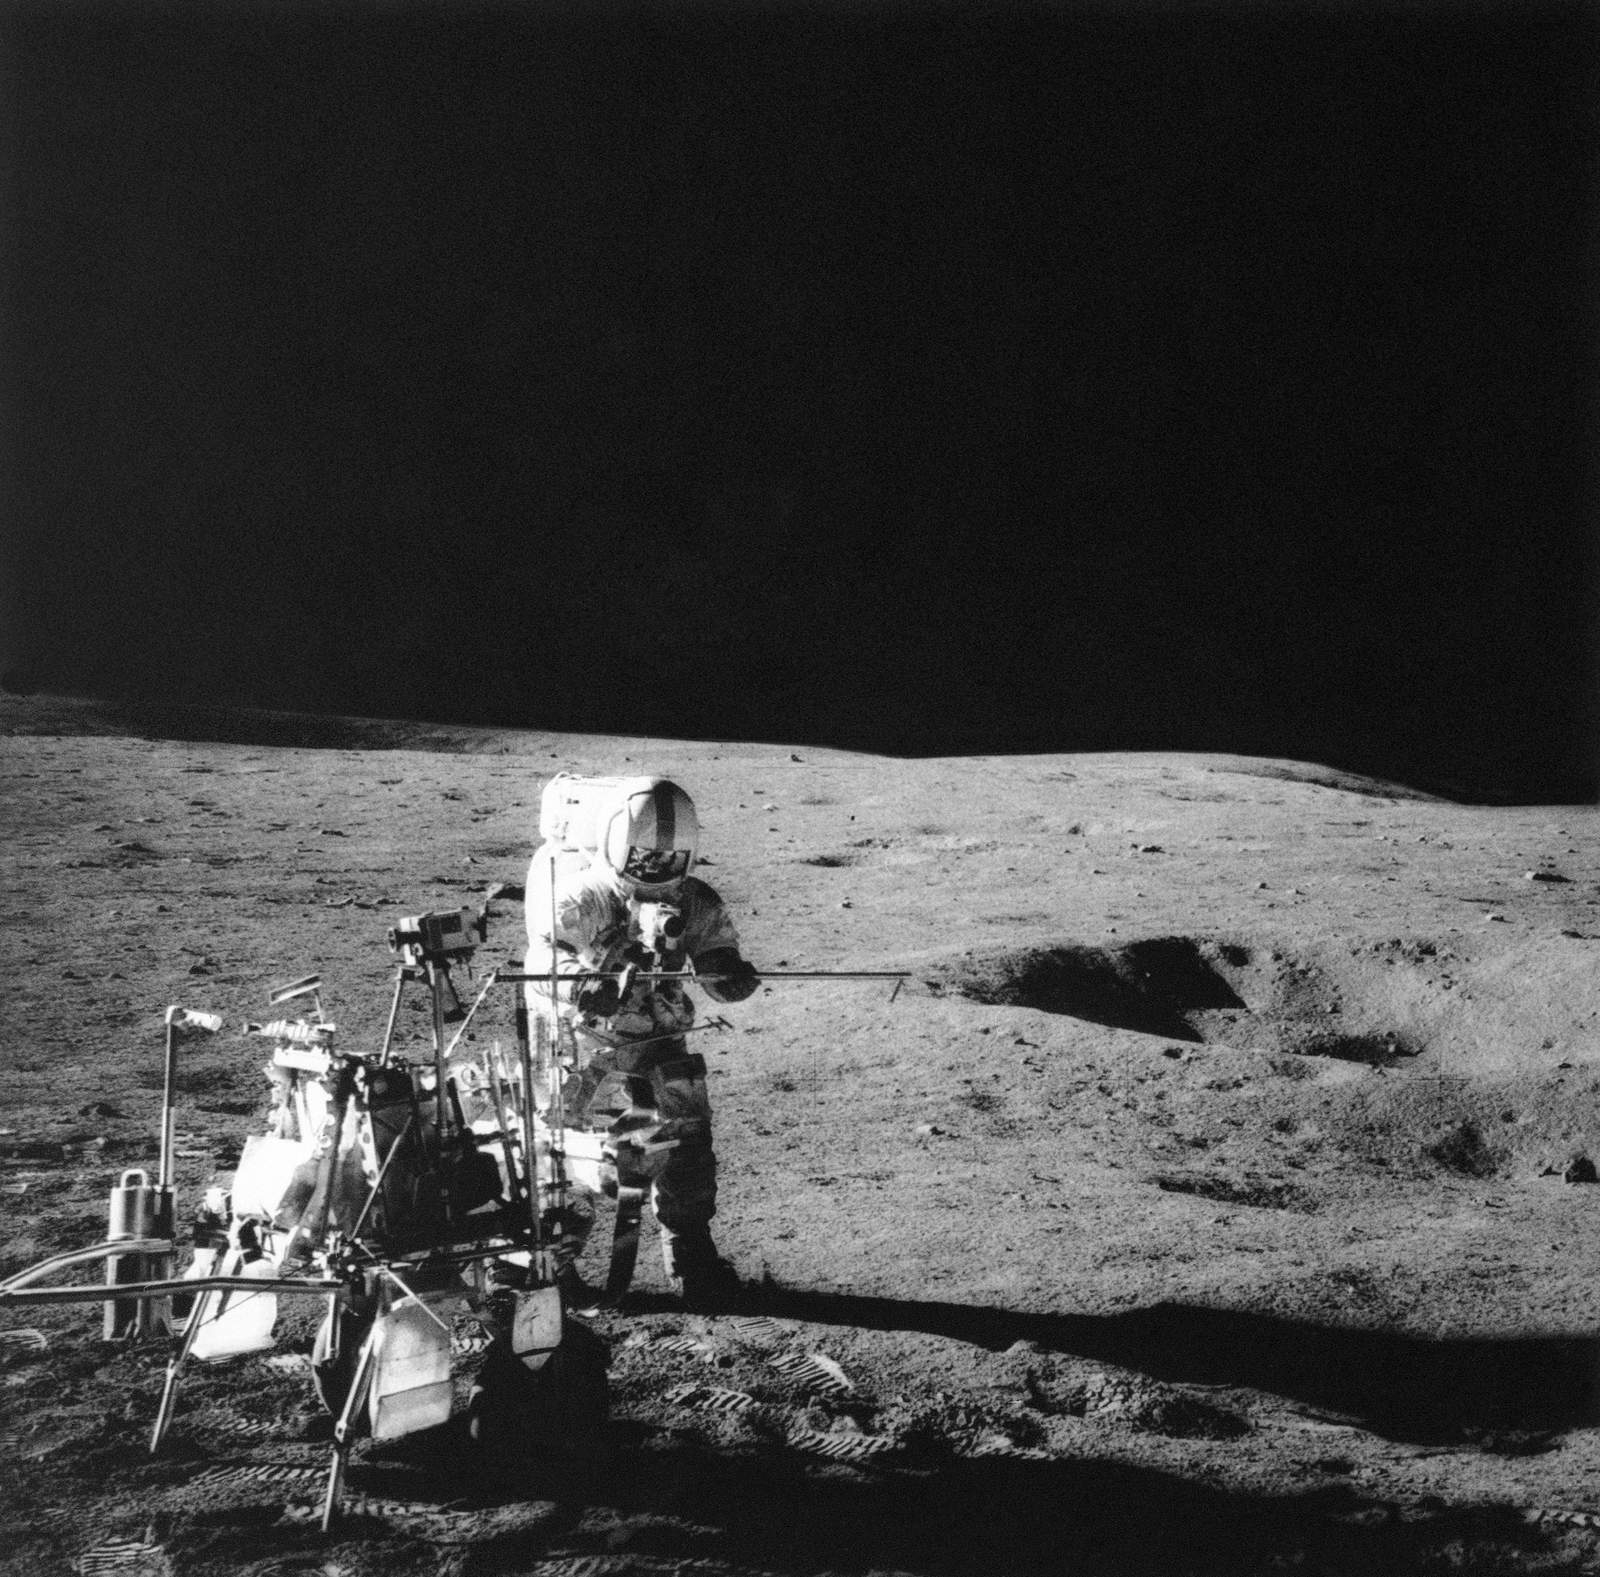 Out of this world: Shepard put golf on moon 50 years ago